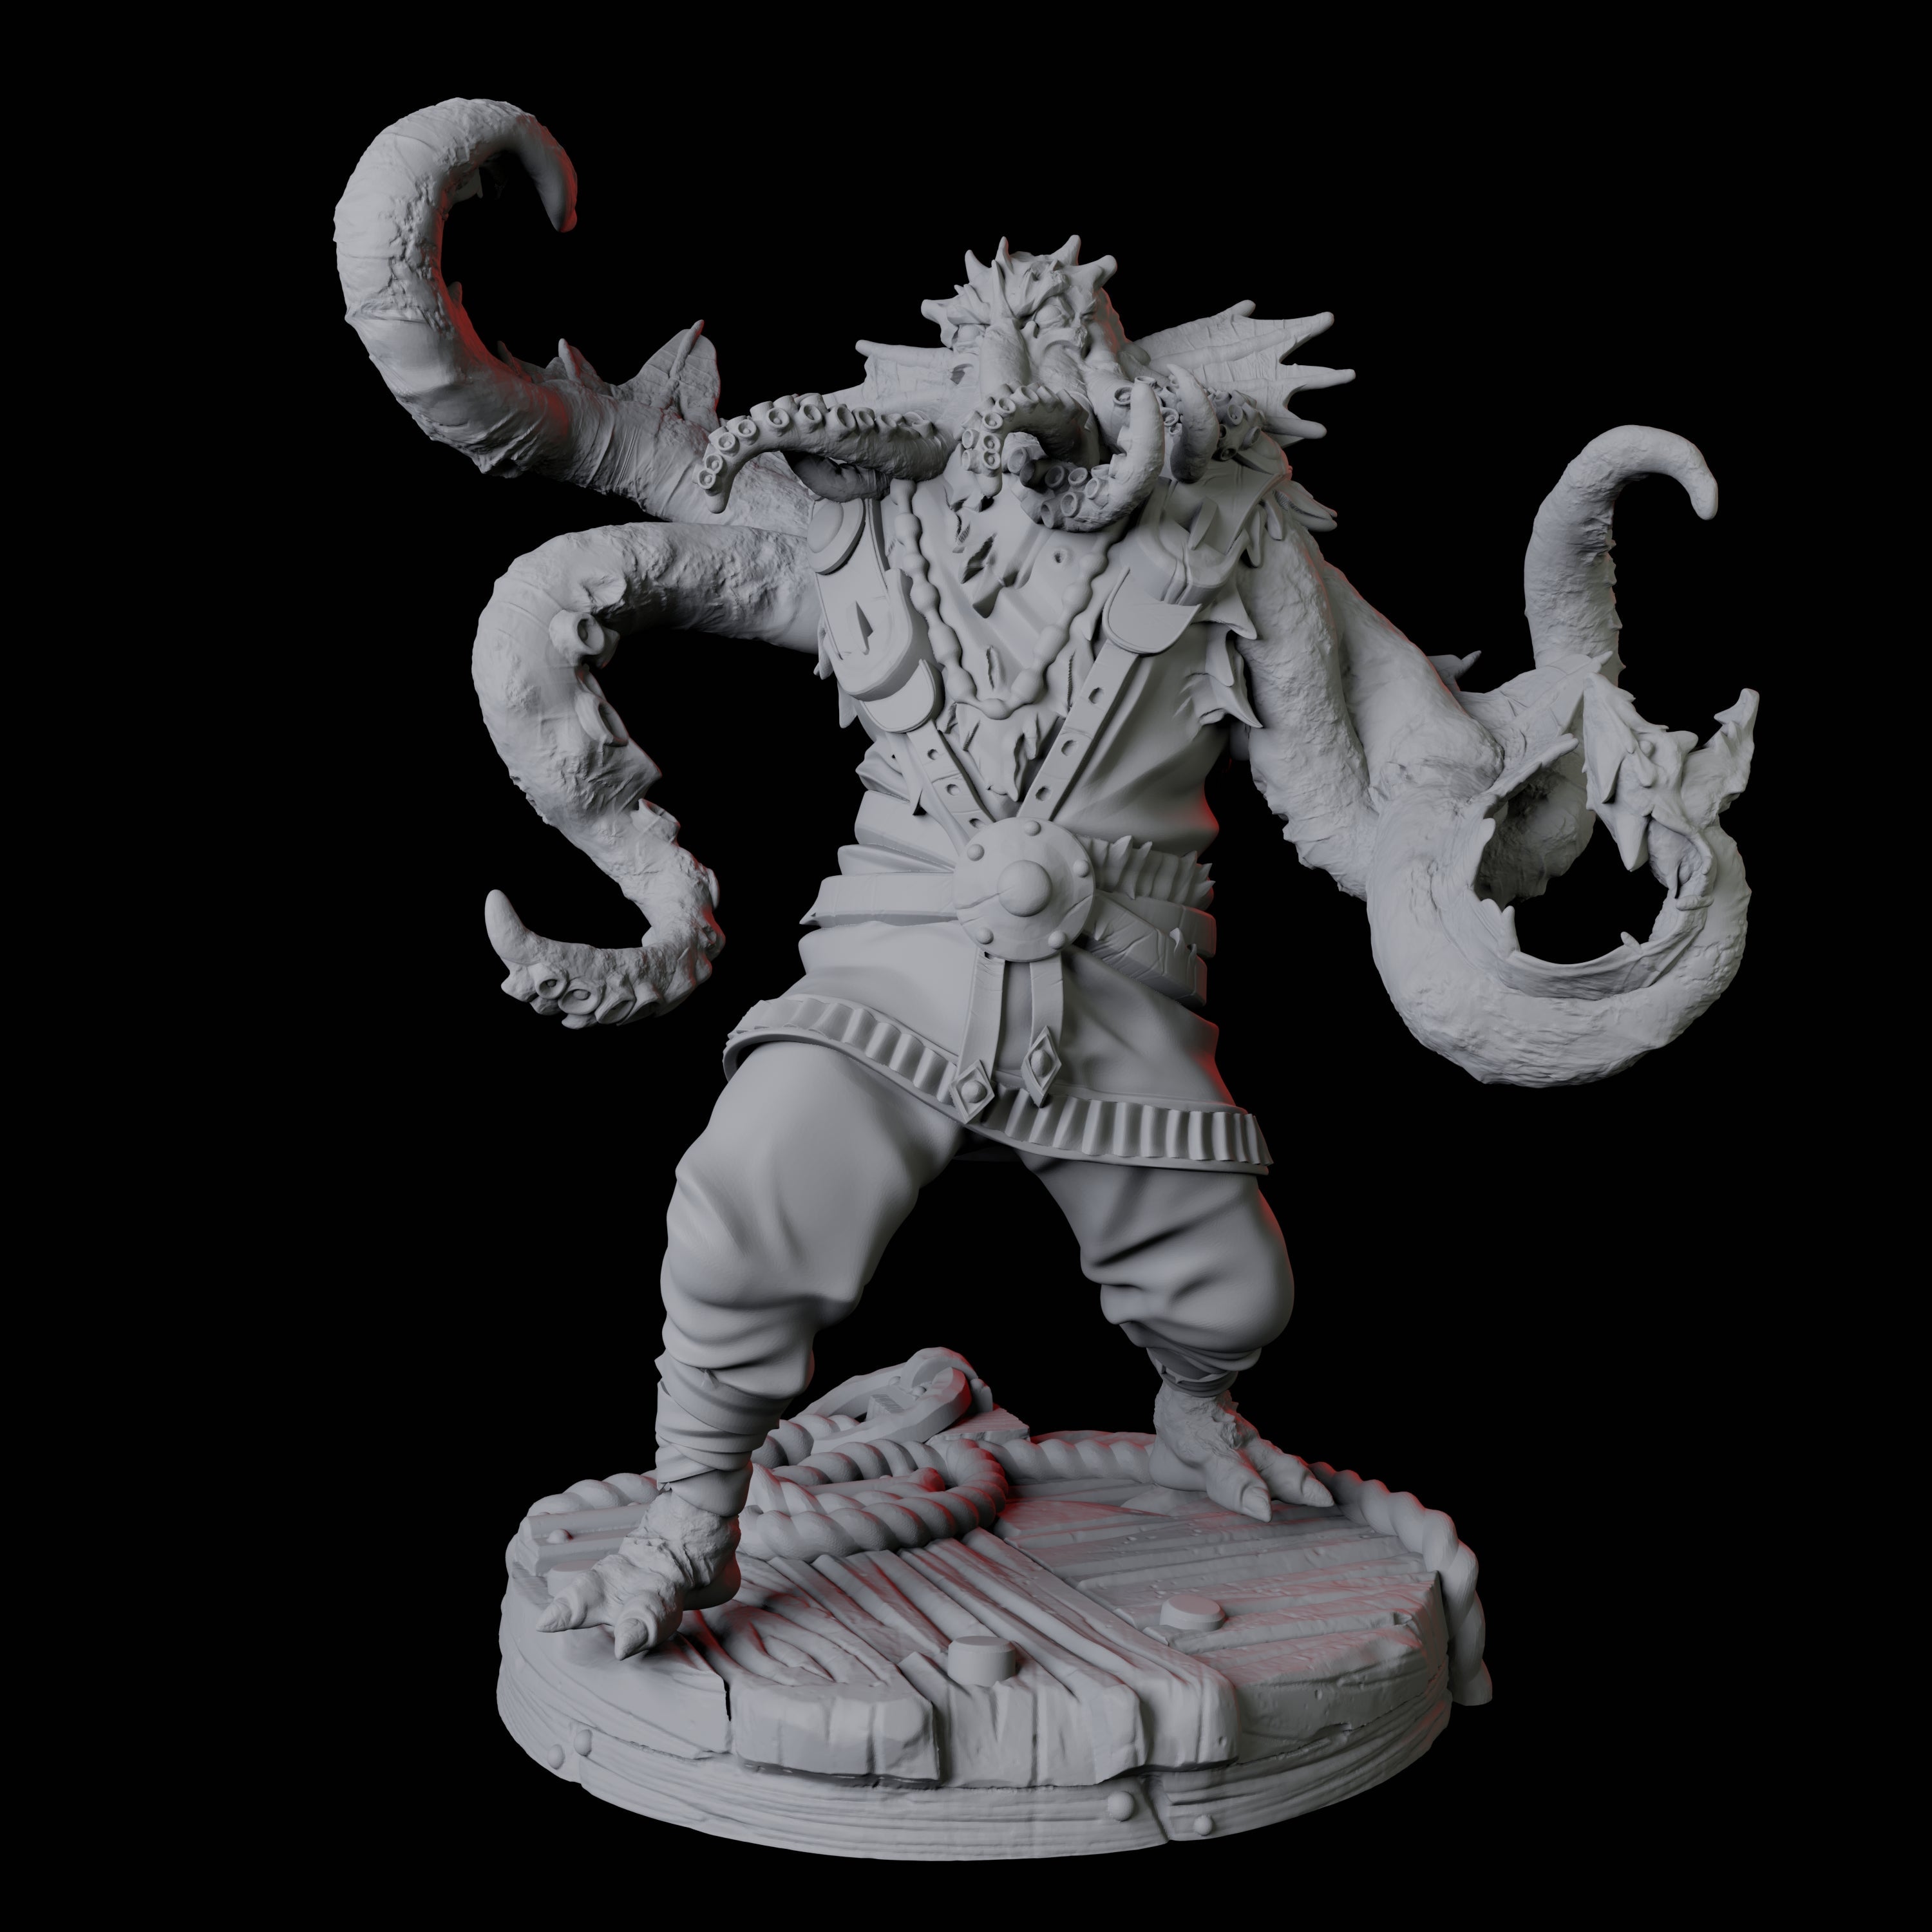 Sky Kraken Acolyte C Miniature for Dungeons and Dragons, Pathfinder or other TTRPGs